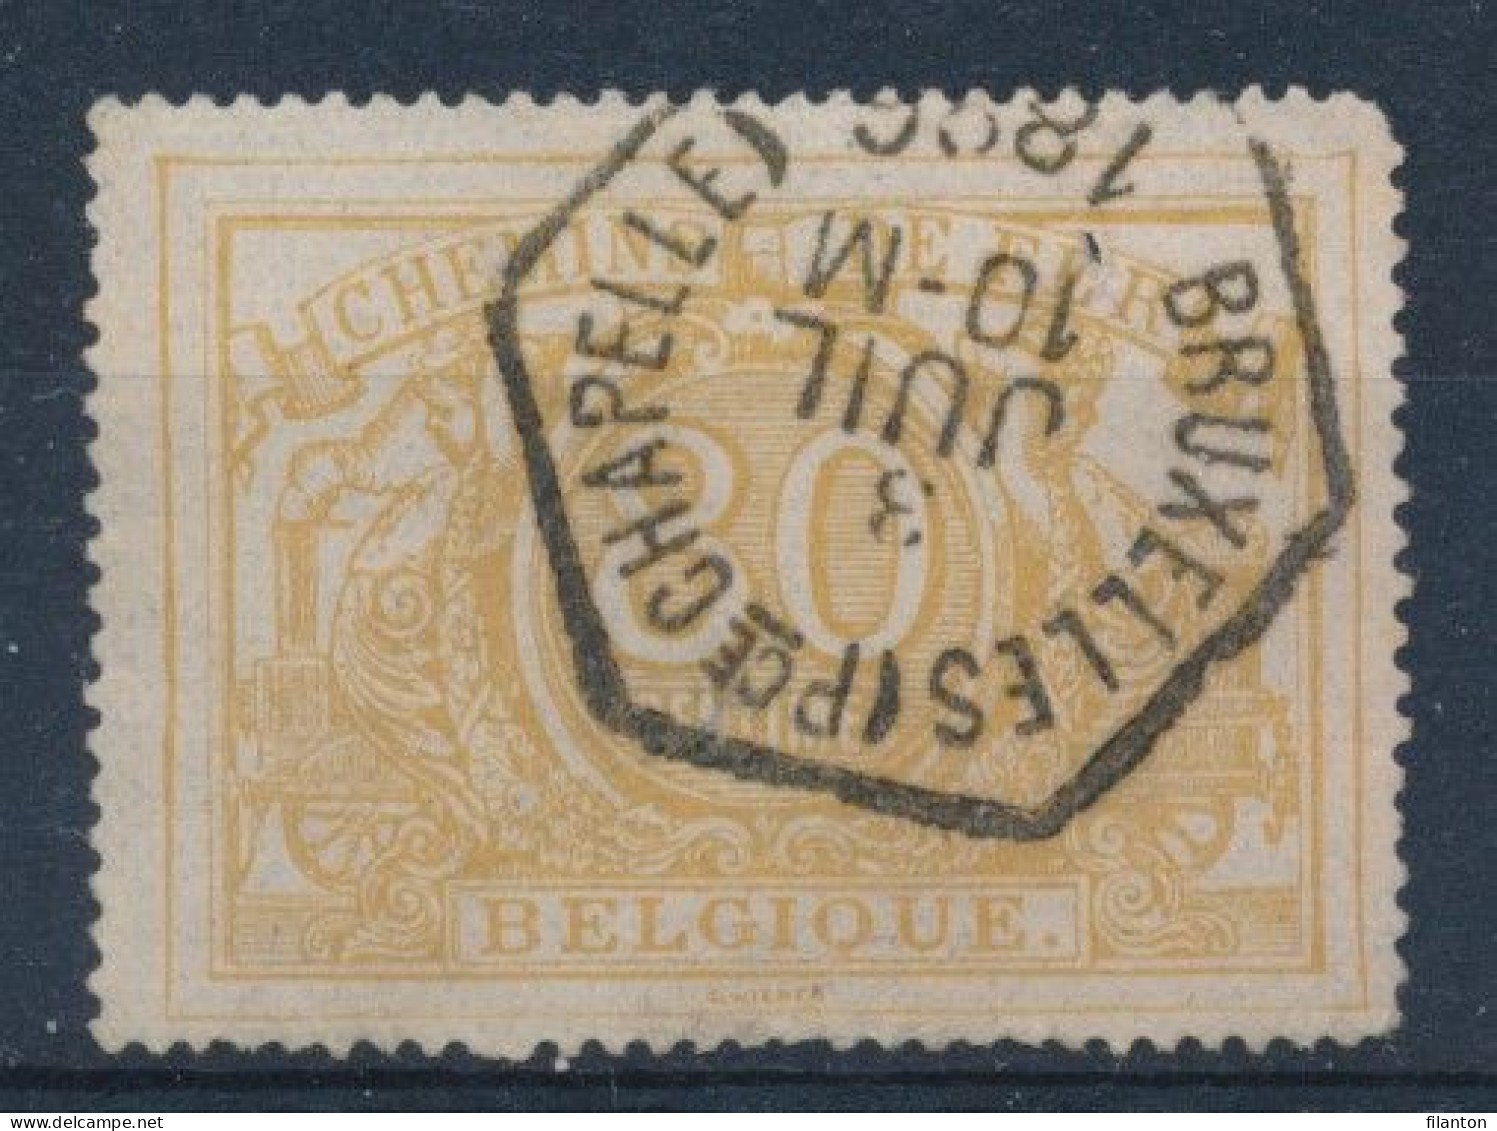 TR  12 - "BRUXELLES (Pce CHAPELLE)" - (ref. 37.556) - Used